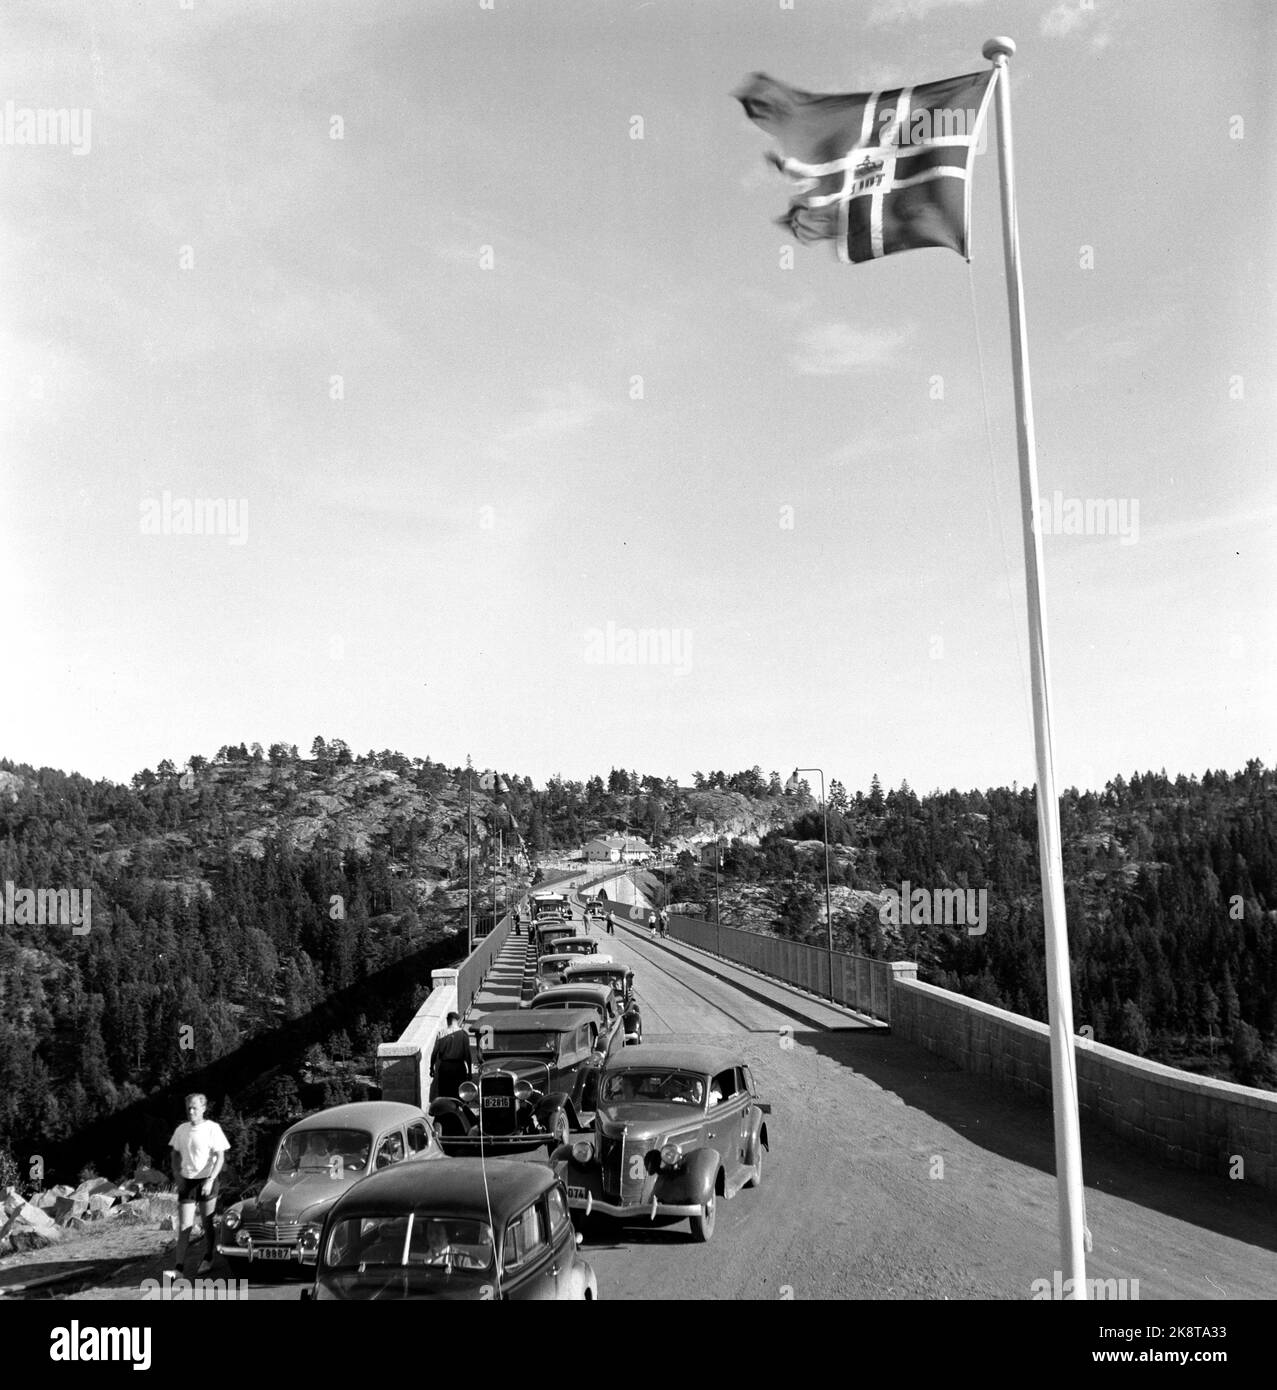 Svinesund 1952; Sugar fever! Norwegians have never crossed the creek for water, but often over the keel for other goods. In the post -war period, sugar was a long -awaited good as there was rationing until 1952. When it was allowed to import 10 kilos of sugar per traveler, the border trade exploded. Norwegian motorists filled the car with '' sugar kids '' who were worth their weight in, if not gold, so at least in sugar! Flag at the customs station at Svinesund. And the car queue is ... infinitely long! Photo; Sverre A. Børretzen / Current / NTB Stock Photo